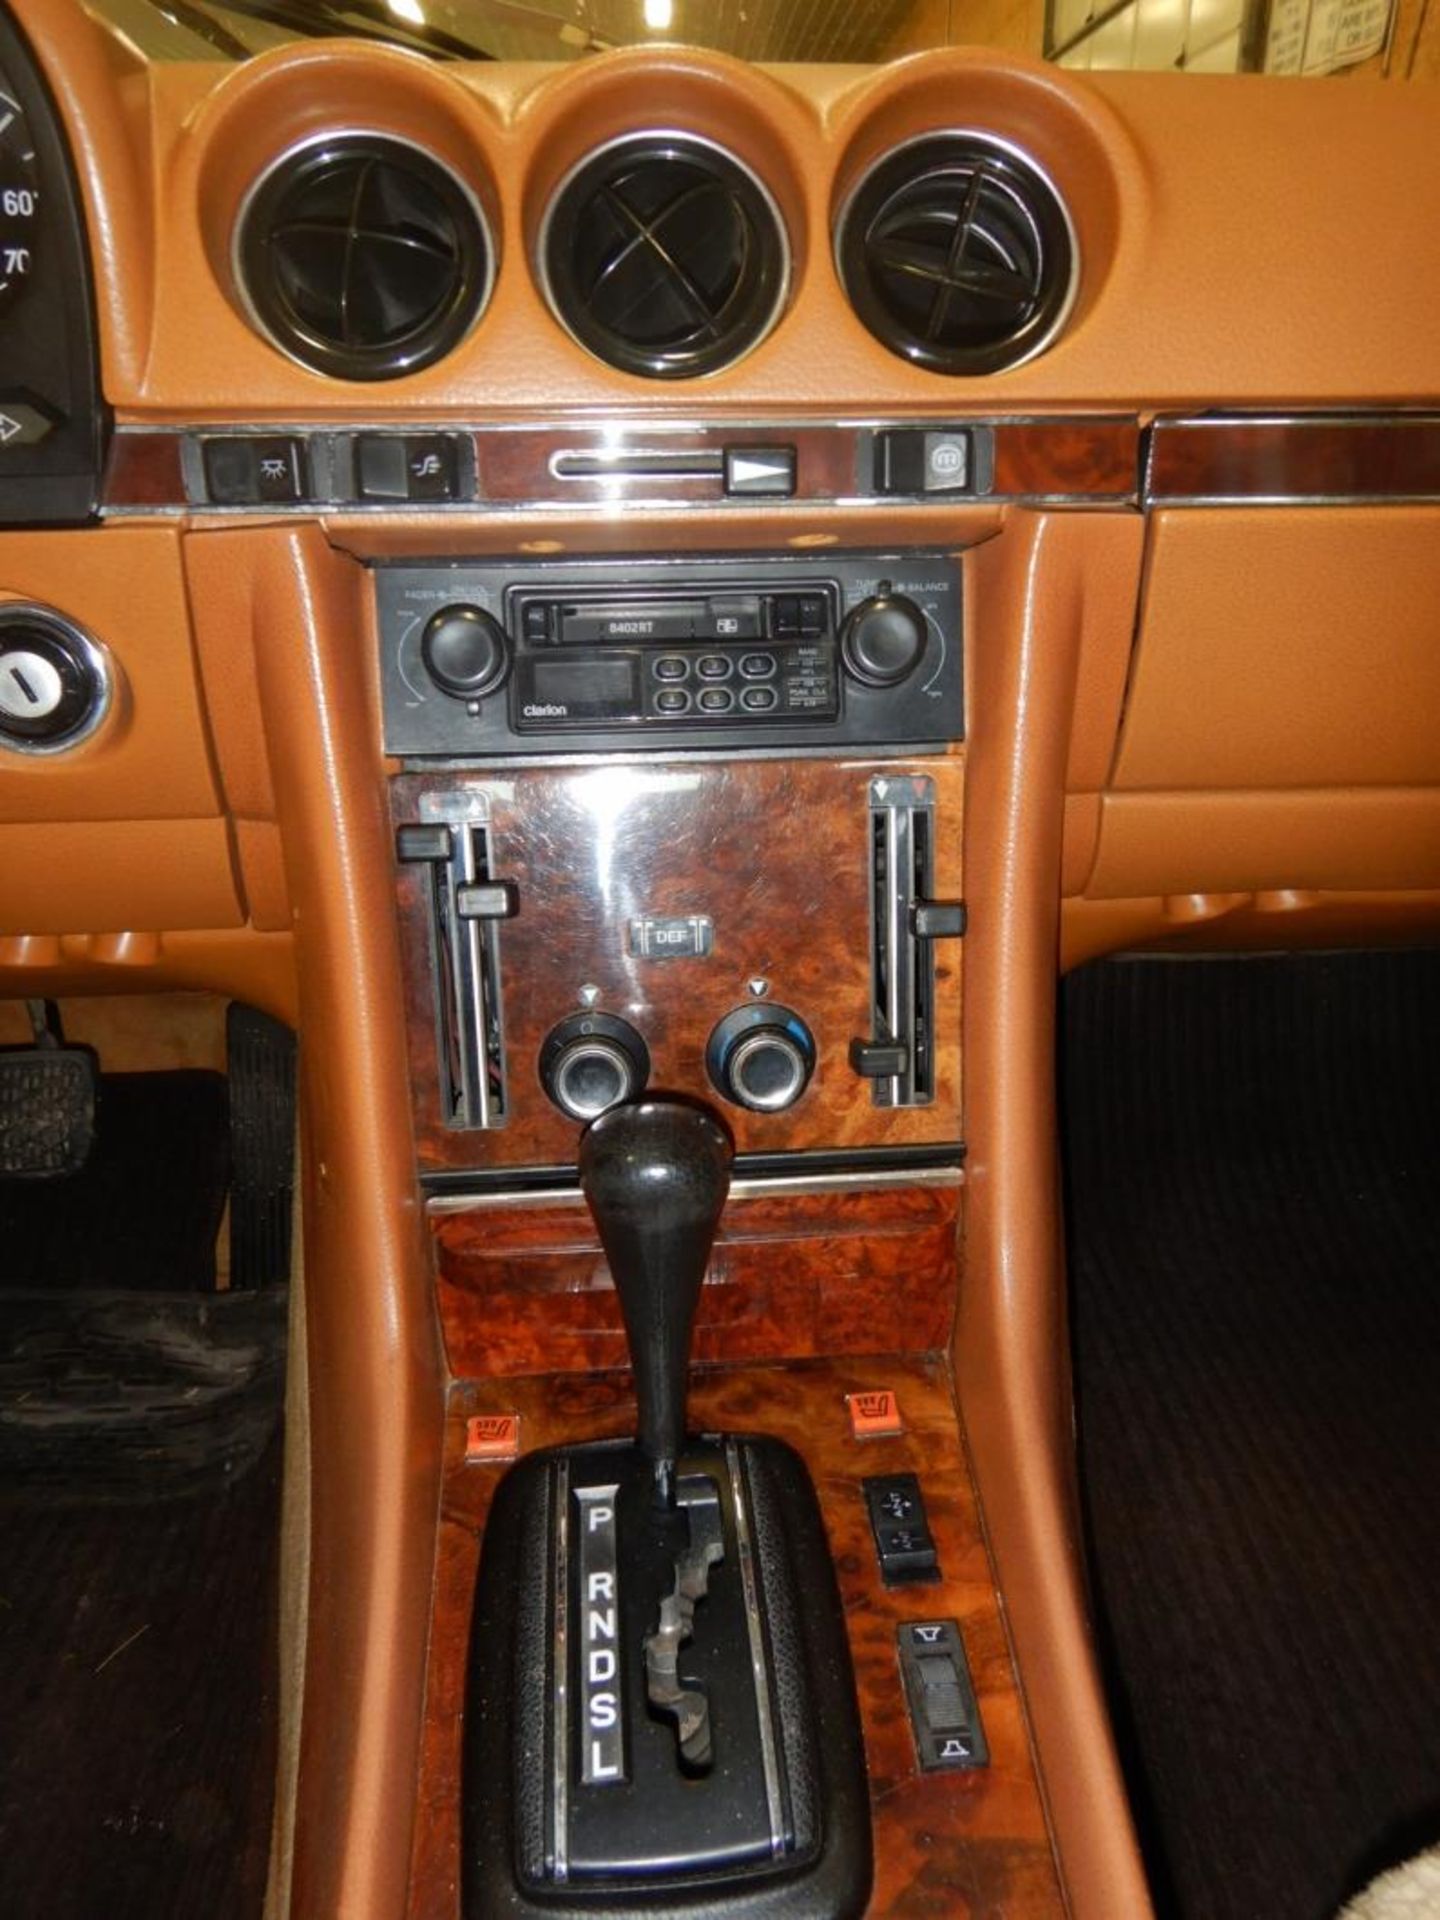 1978 MERCEDES-BENZ 450 SL C COUPE CAR, 2 DR, 2WD, AT, GAS, 227,849KMS, ONE OWNER - Image 12 of 19